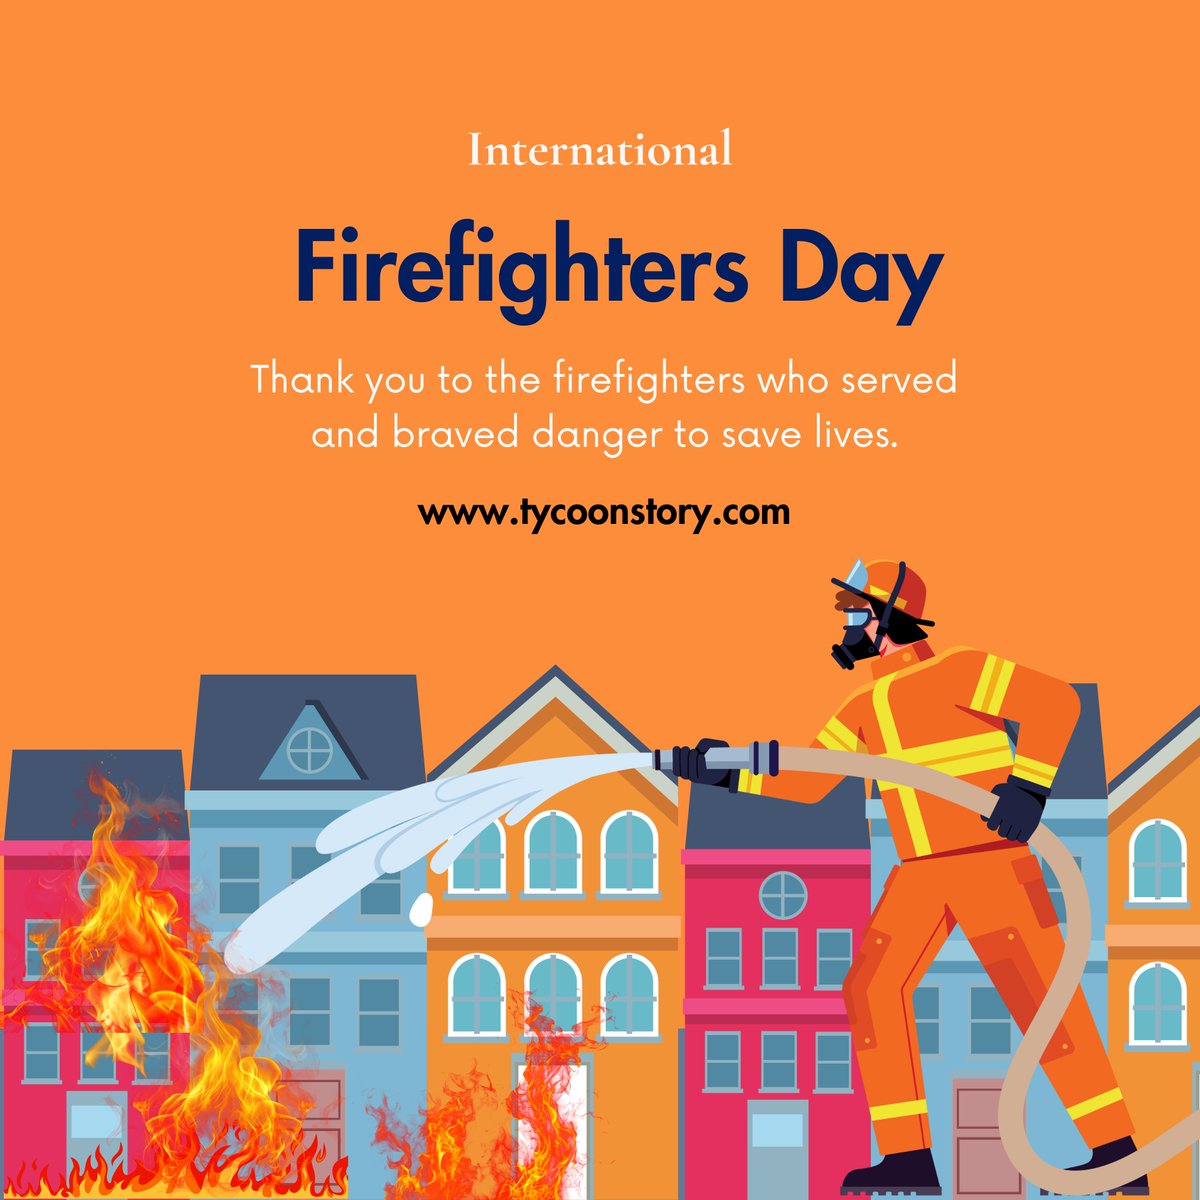 Ready to Honor Our Firefighters?

#InternationalFirefightersDay #firefightersbravery #BraveAndBold #EverydayHeroes #CommunityHeroes #firefighterfamily #StrengthInUnity #safetyfirst #firefighterstrong #emergencyresponders #SupportOurHeroes @TycoonStoryCo @Wikipedia @NFFF_News